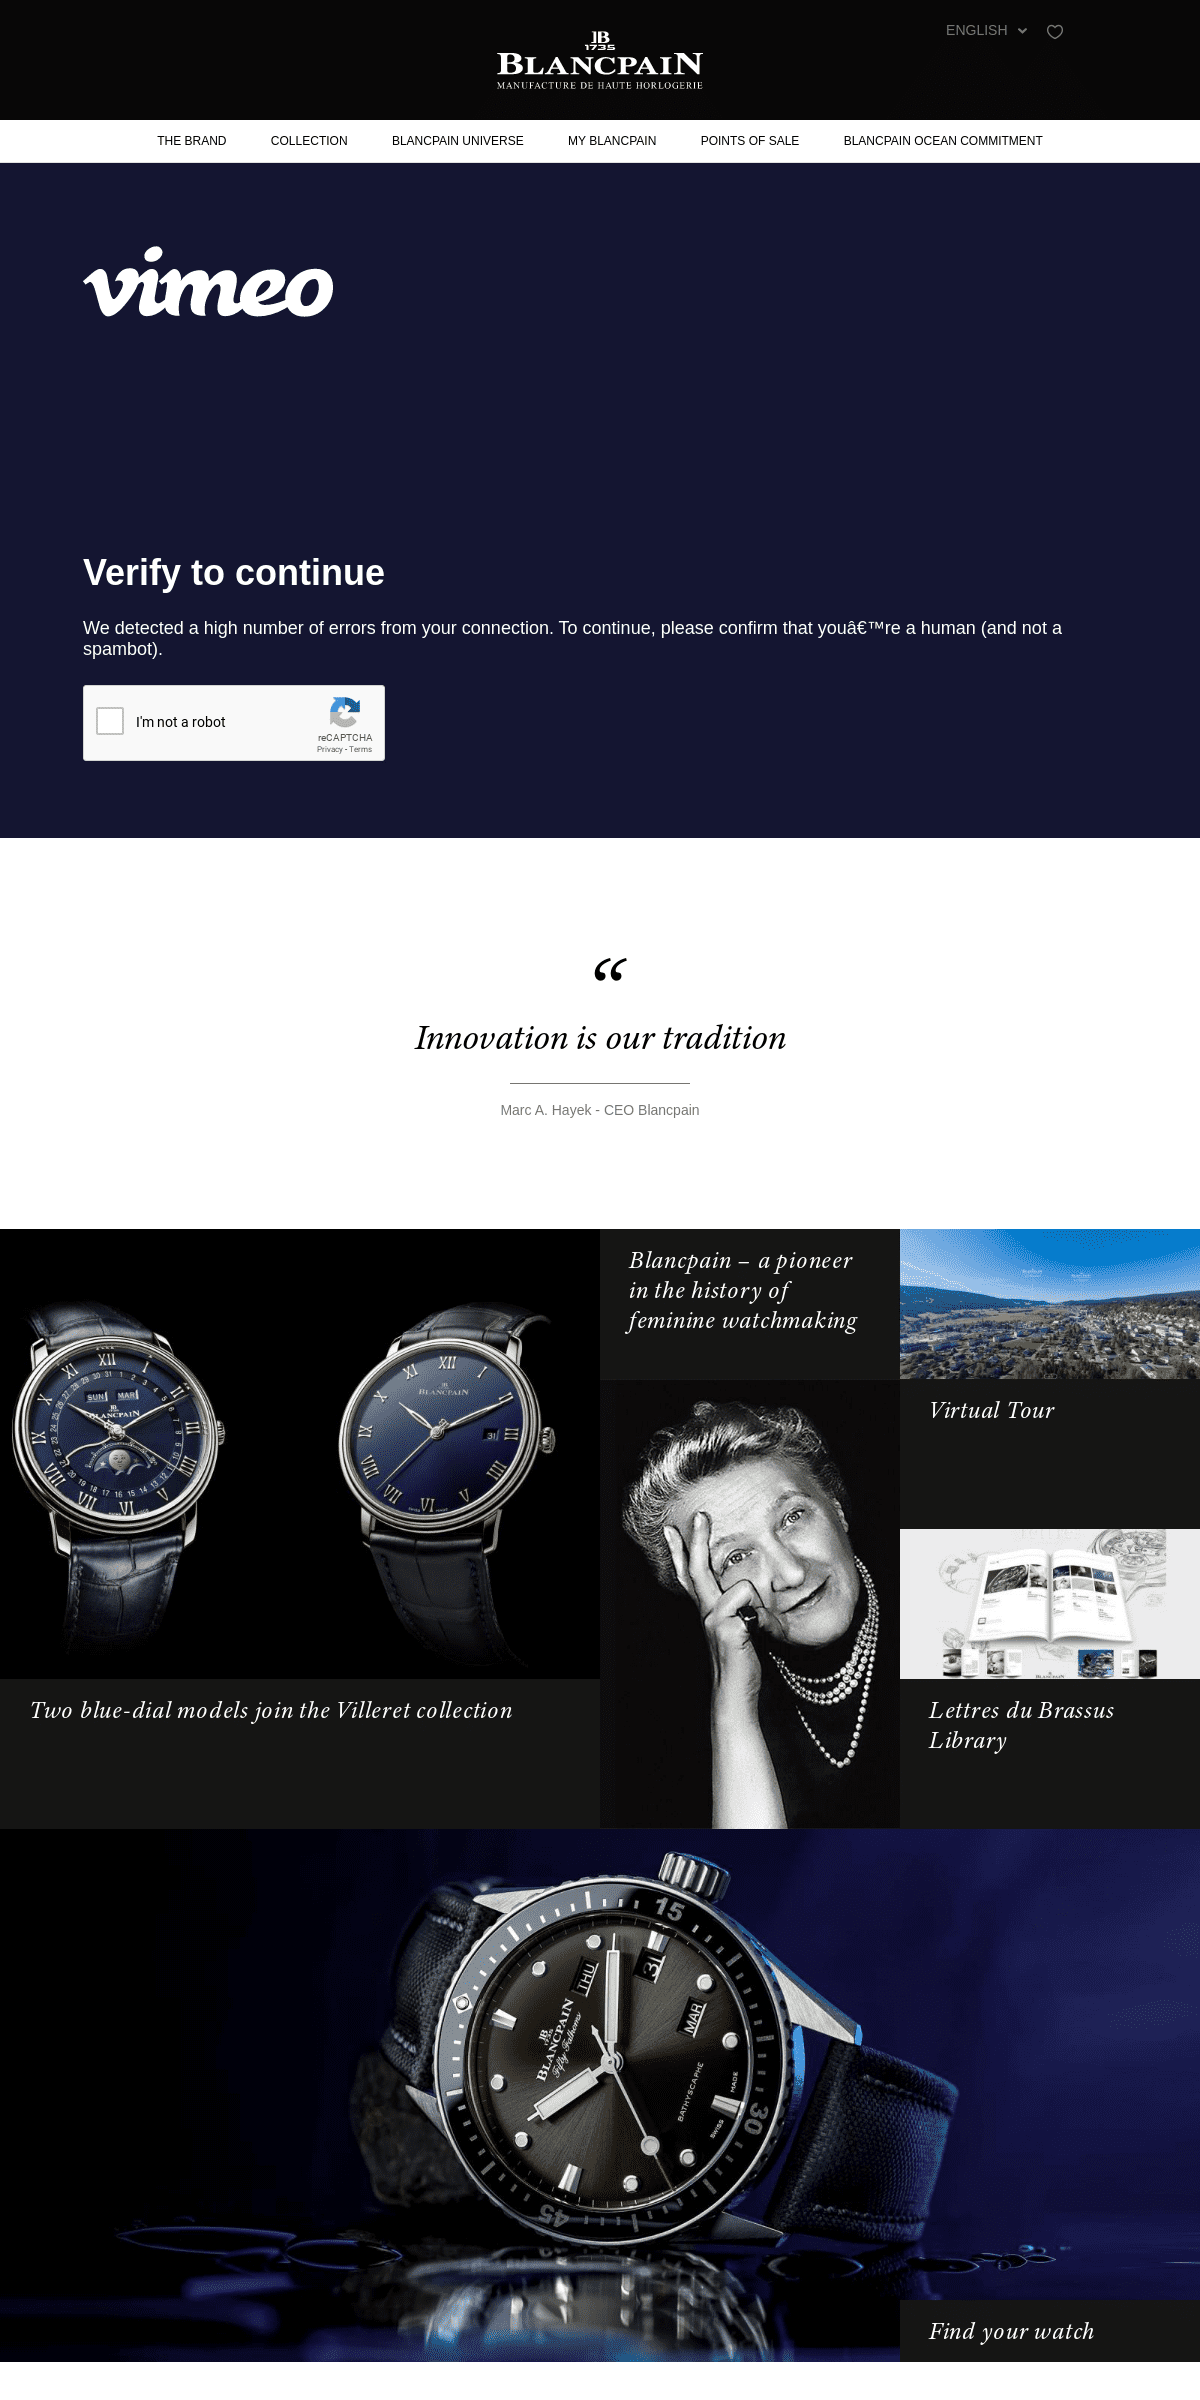 A complete backup of blancpain.com